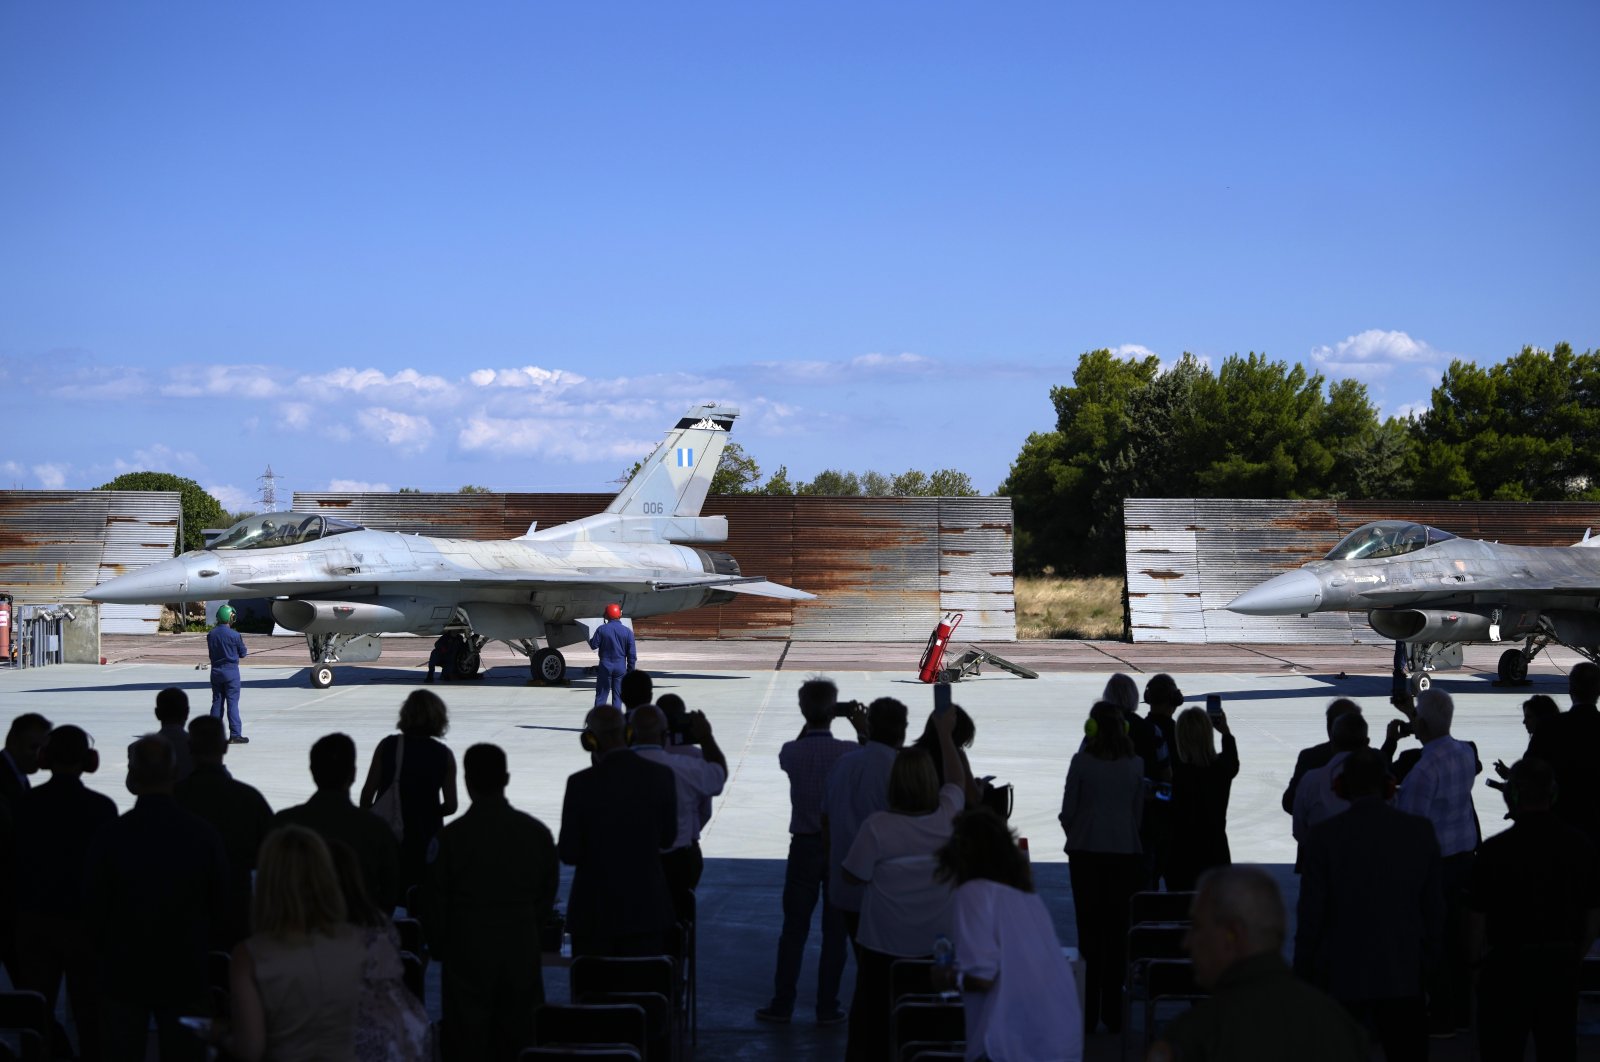 Guests take photographs of the two Greek fighter jets F-16 Vipers at Tanagra air force base about 74 kilometers (46 miles) north of Athens, Greece, Sept. 12, 2022. (AP Photo)